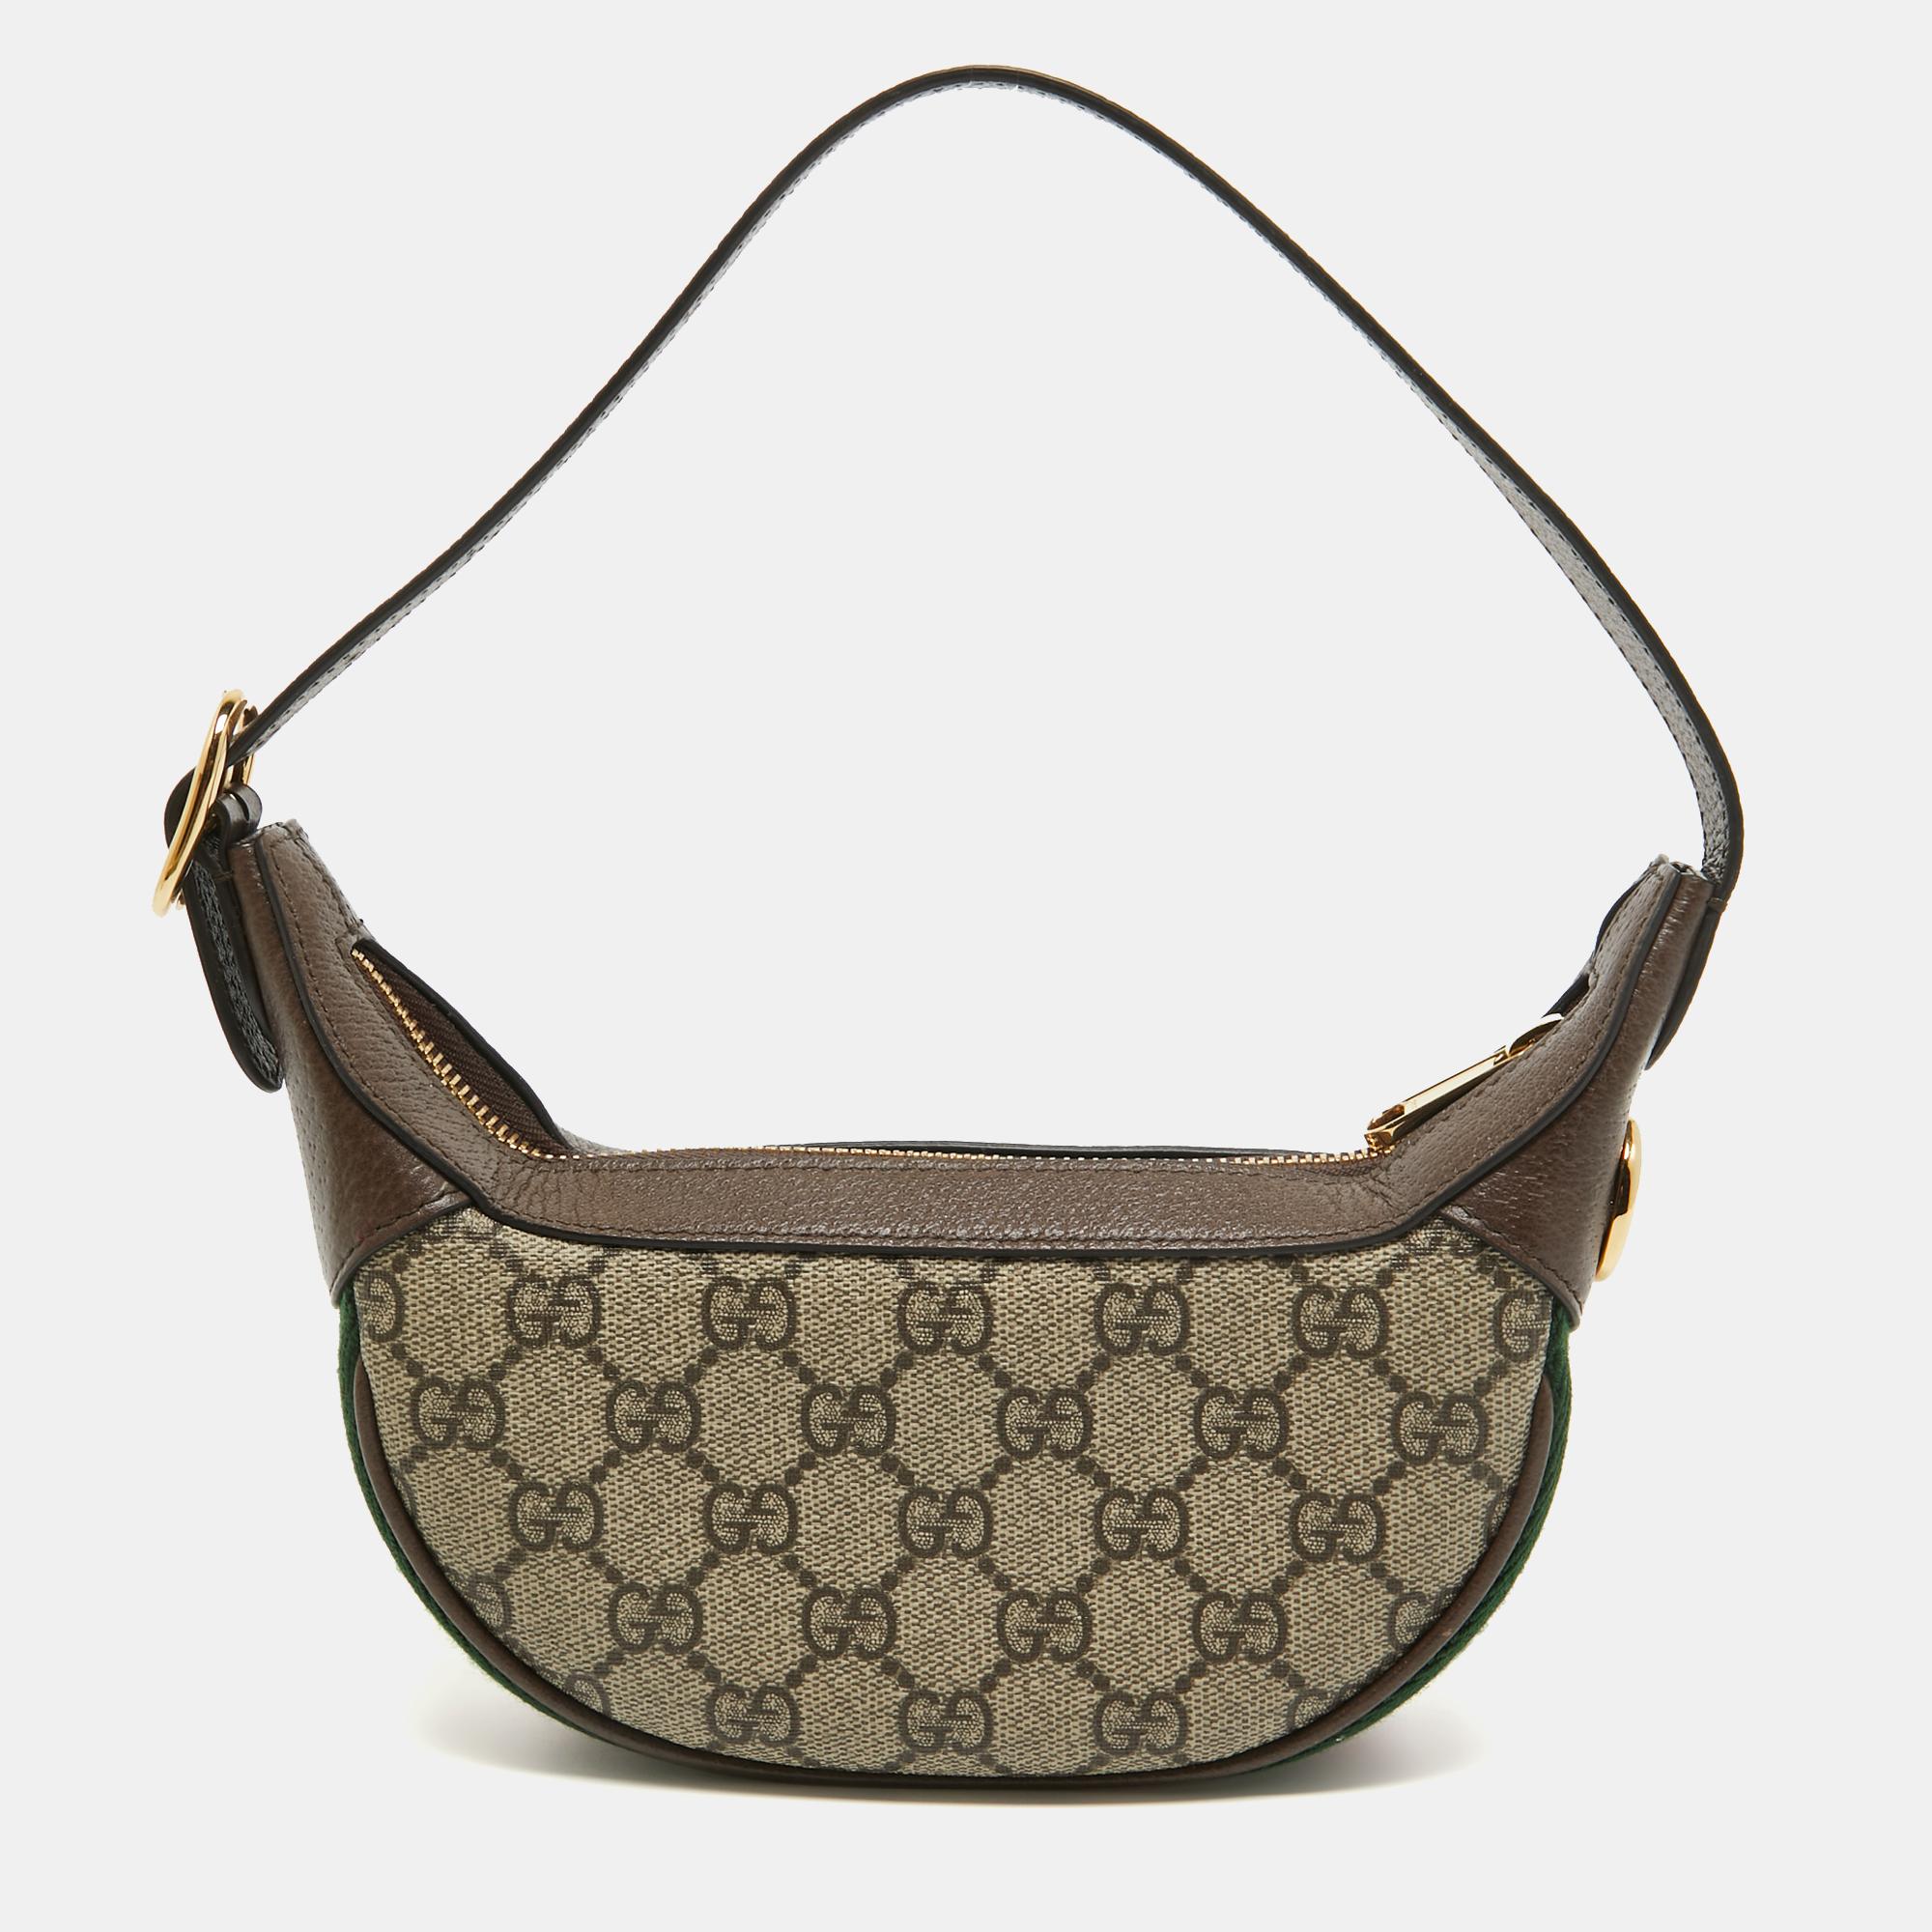 Created from the GG supreme canvas and leather, this Gucci bag is imbued with heritage details. The Web stripe detailing and the interlocked 'GG' motif on the front give it a luxe update. Lined with suede, this bag makes for a luxurious abode for